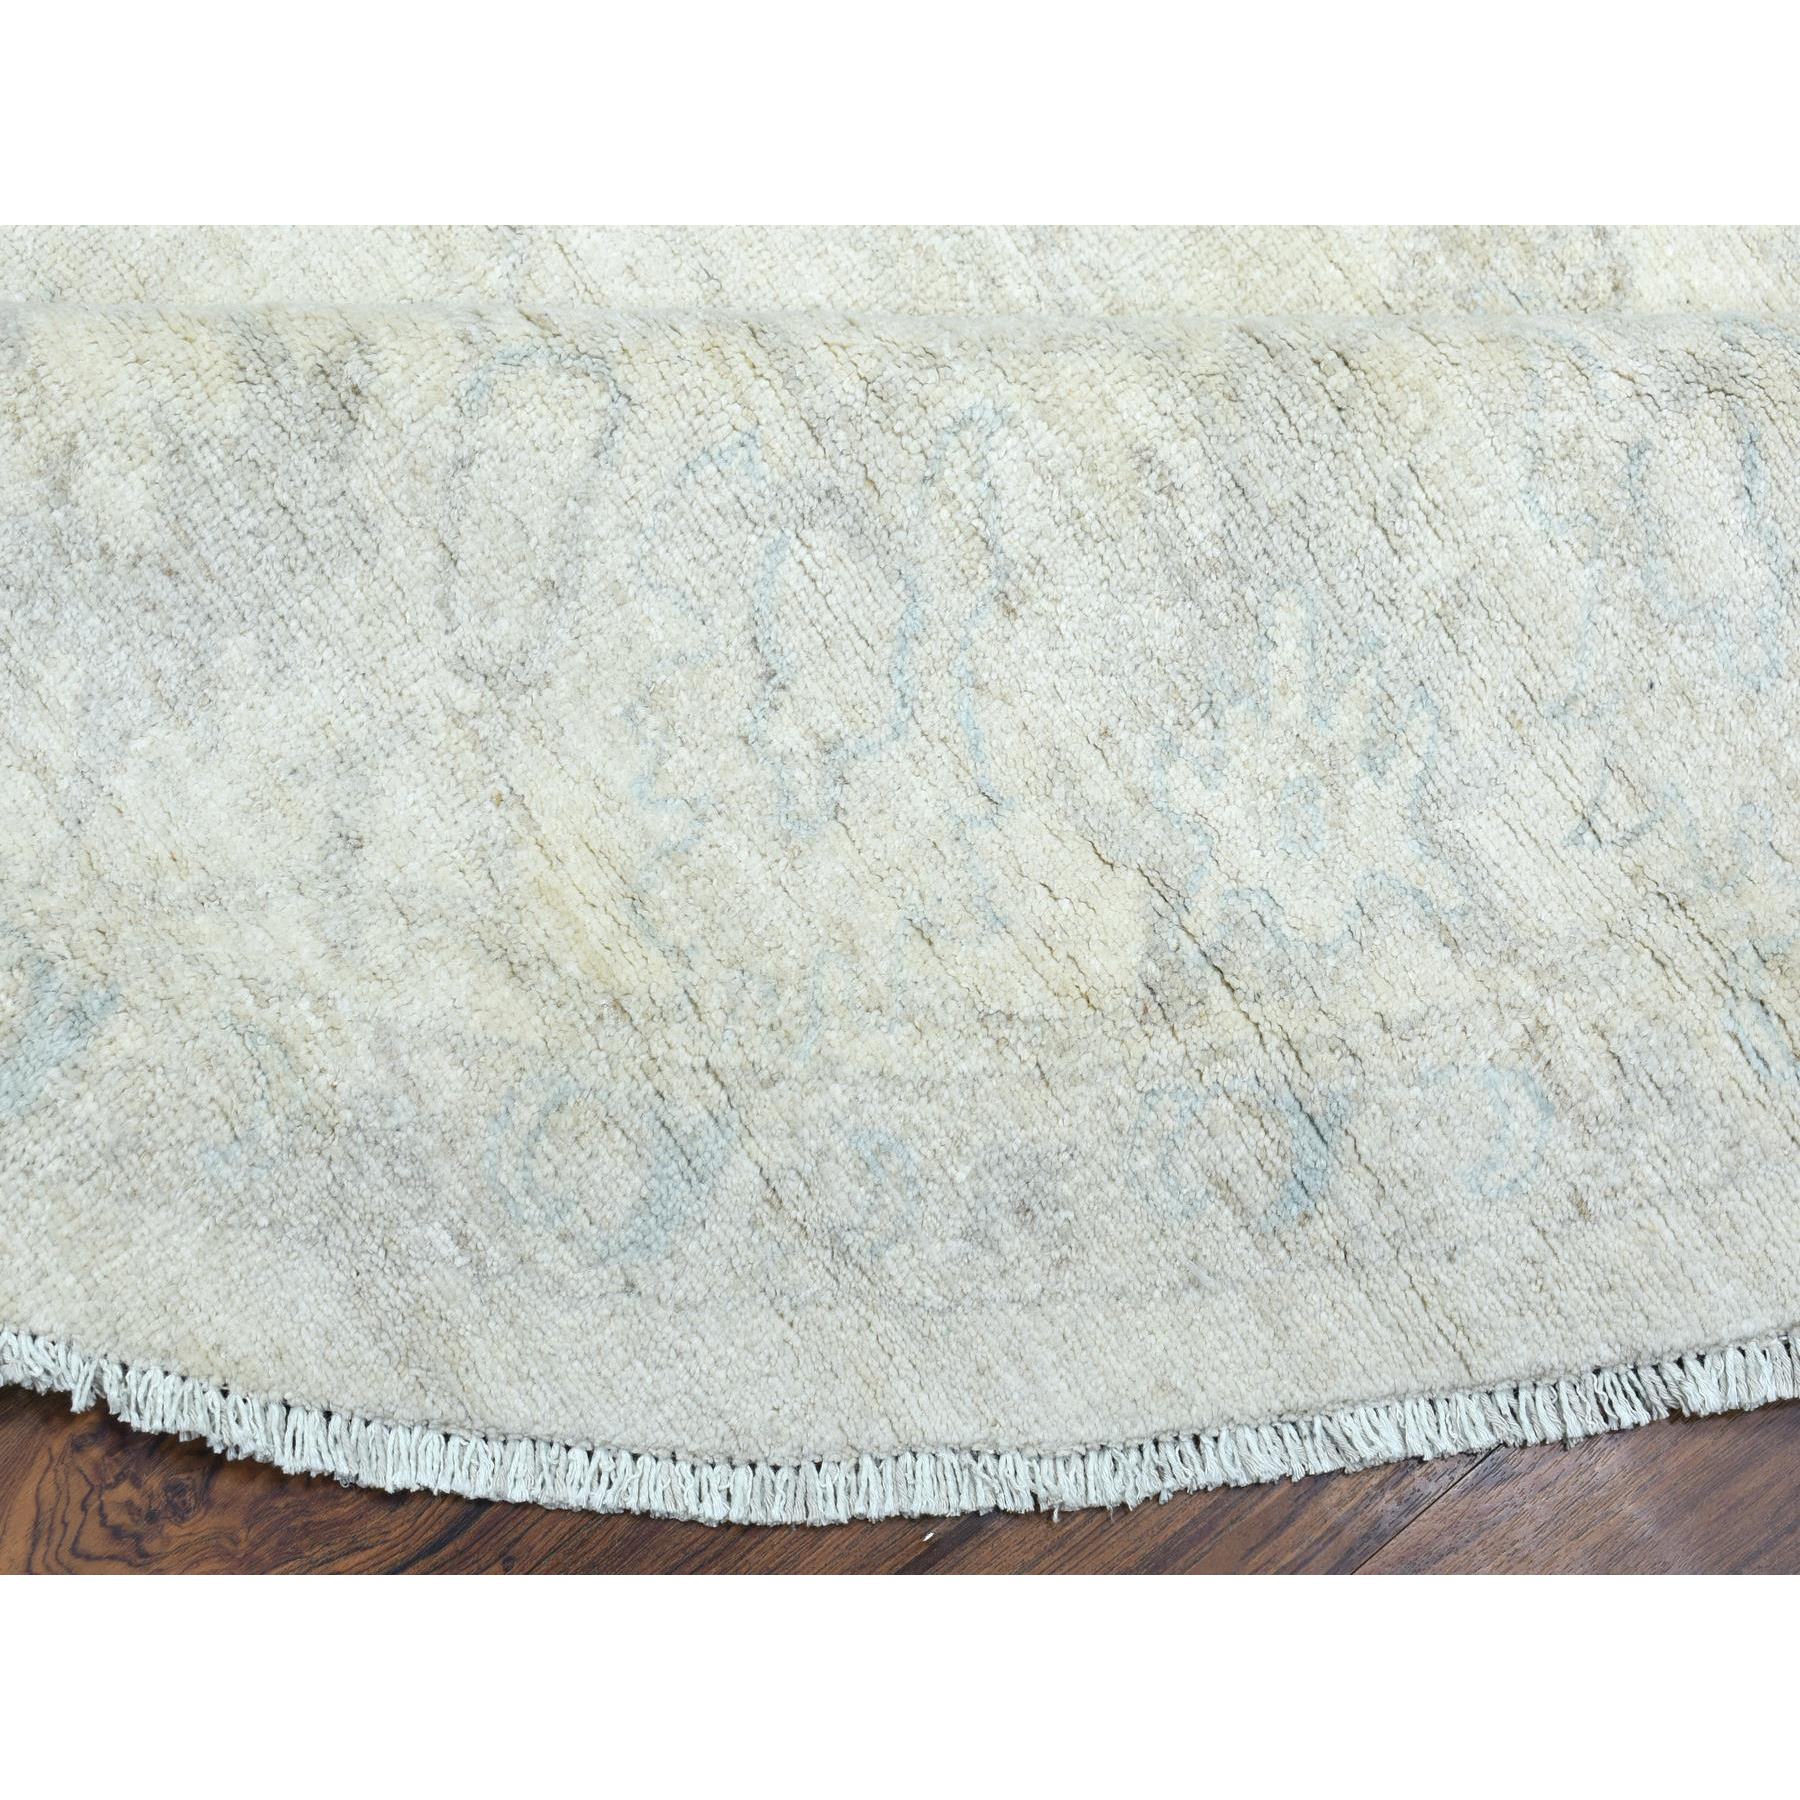 7'10"x7'10" Ivory, White Wash Peshawar Natural Dyes, Soft and Shiny Wool Hand Woven, Round Oriental Rug 